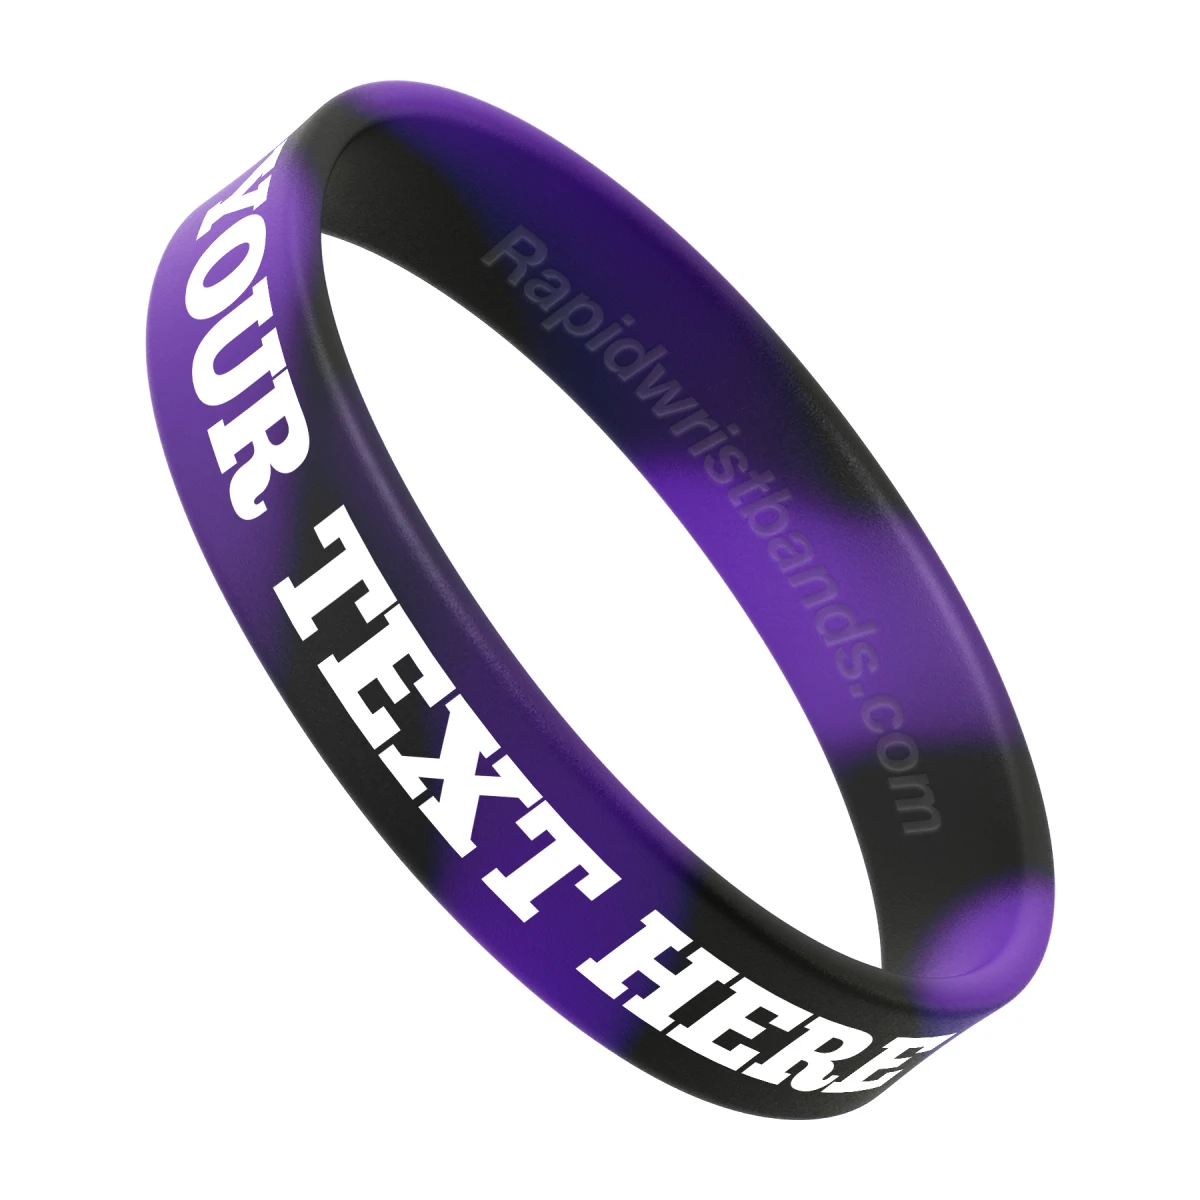 Swirl Black/Purple Wristband With Your Text Here Printed In White